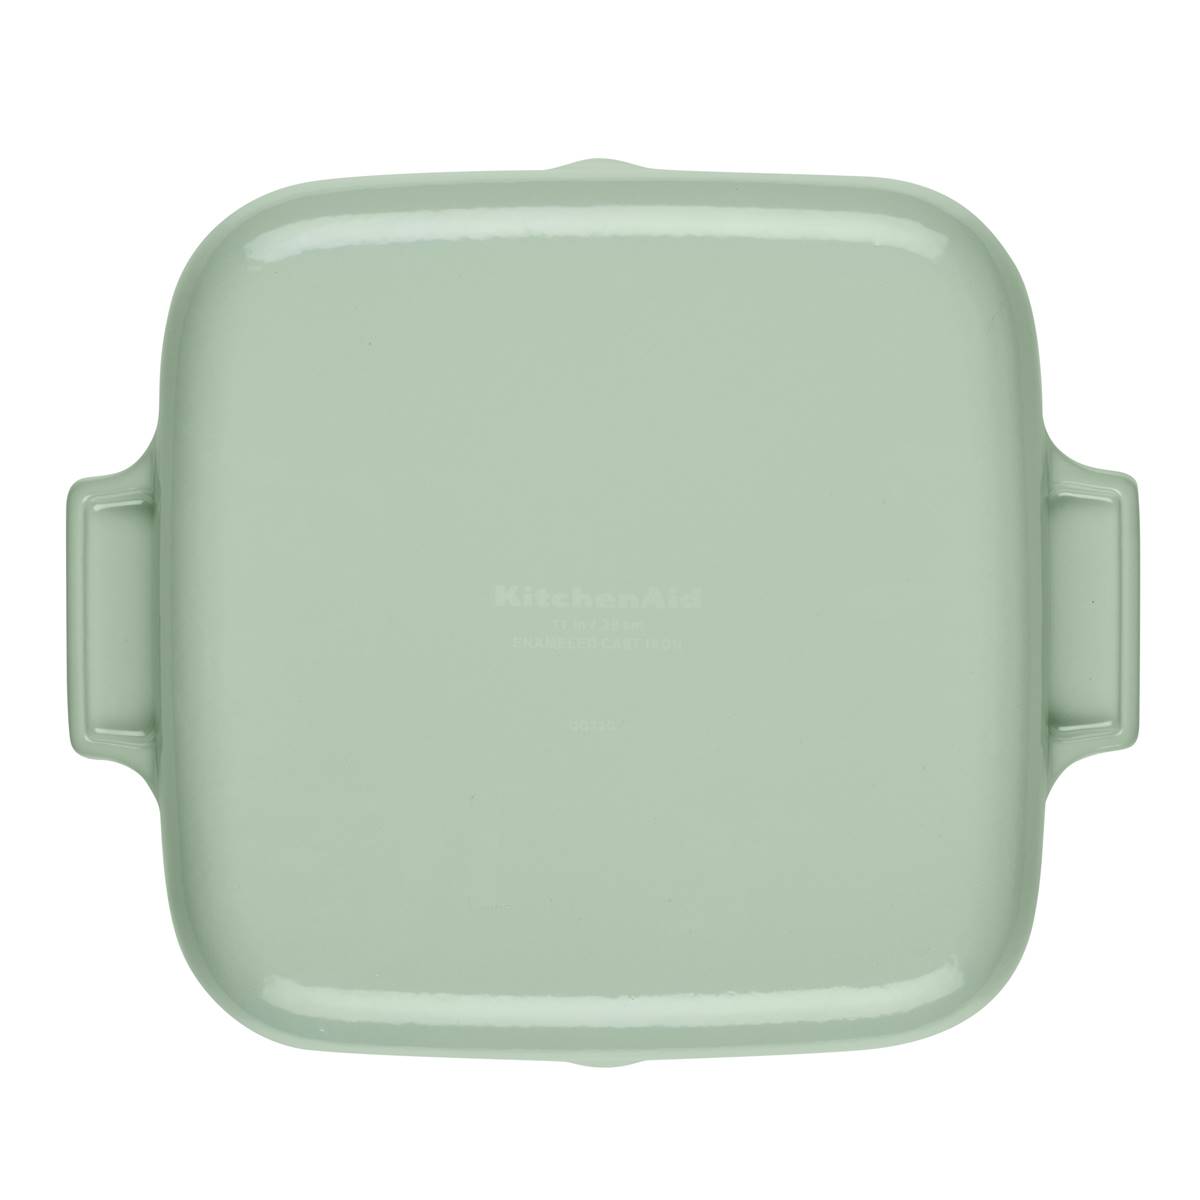 KitchenAid(R) 11in. Enameled Cast Iron Induction Square Grill Pan